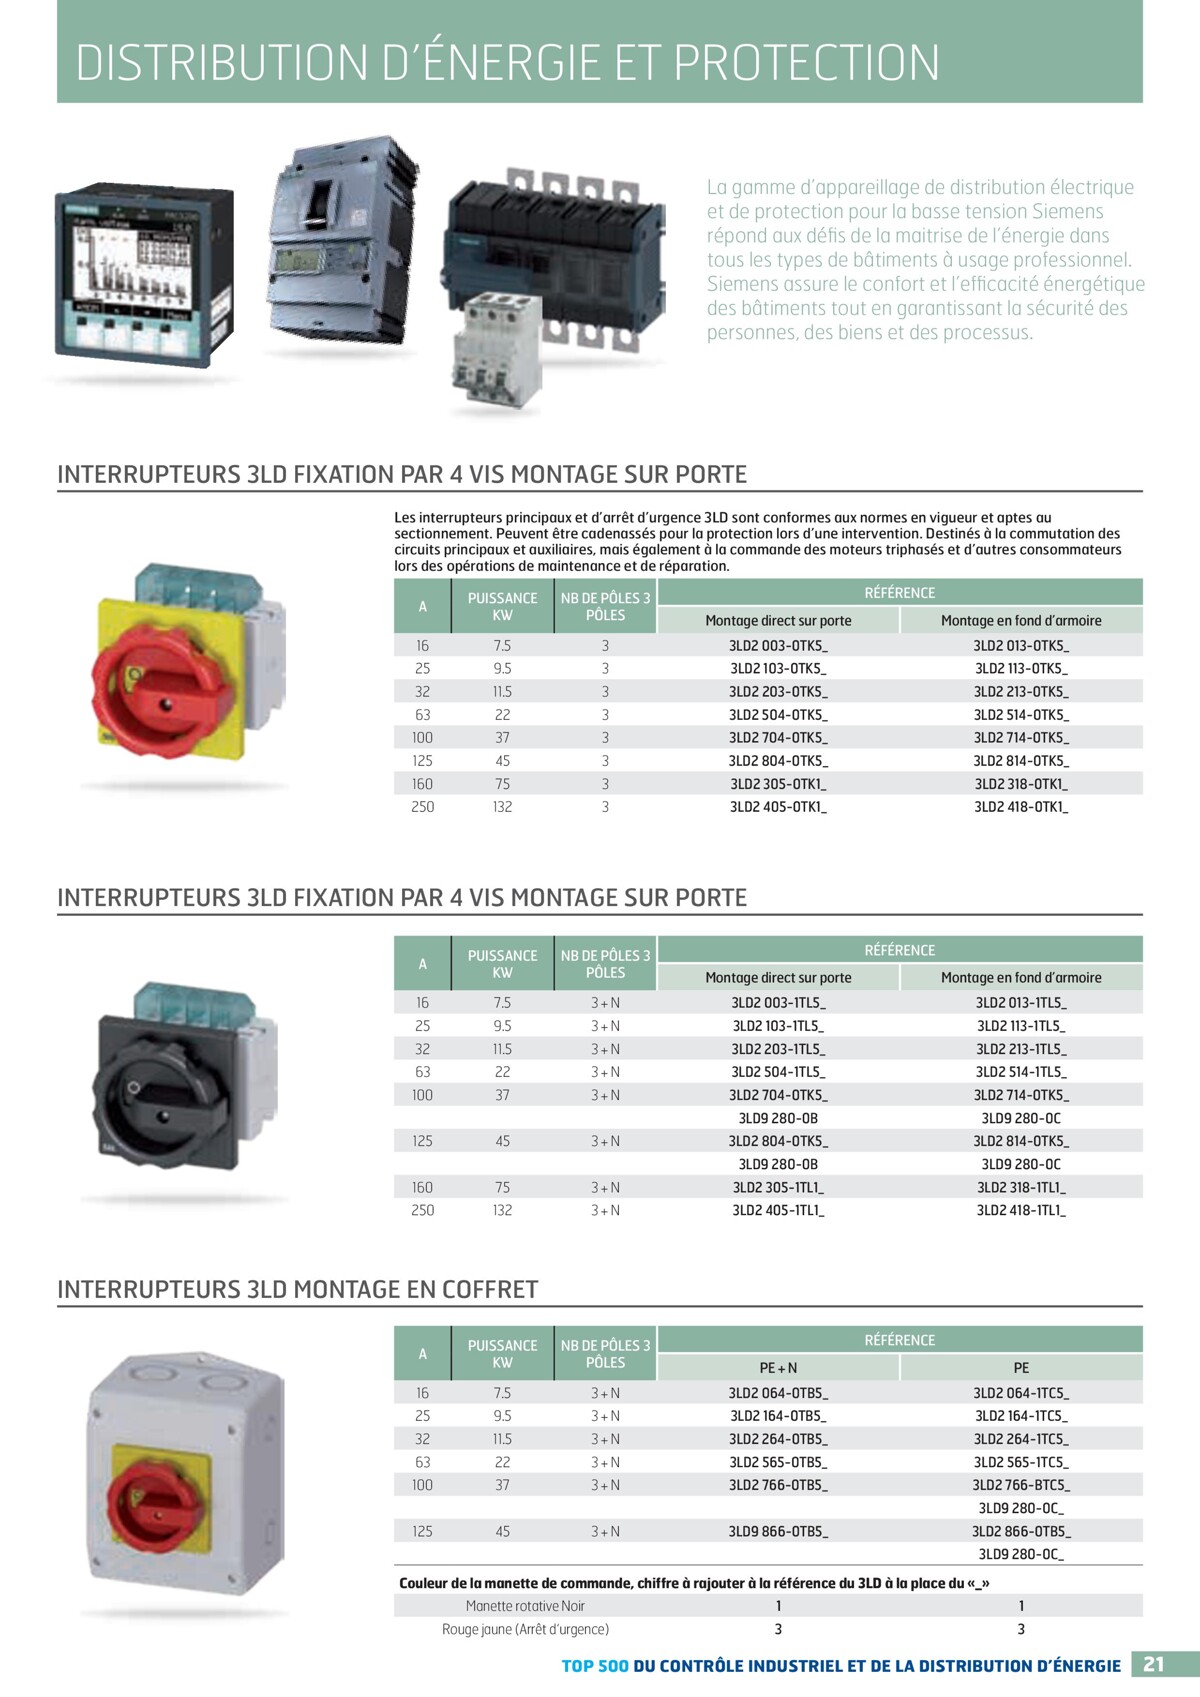 Catalogue TOP 500 siemens - Rexel, page 00021